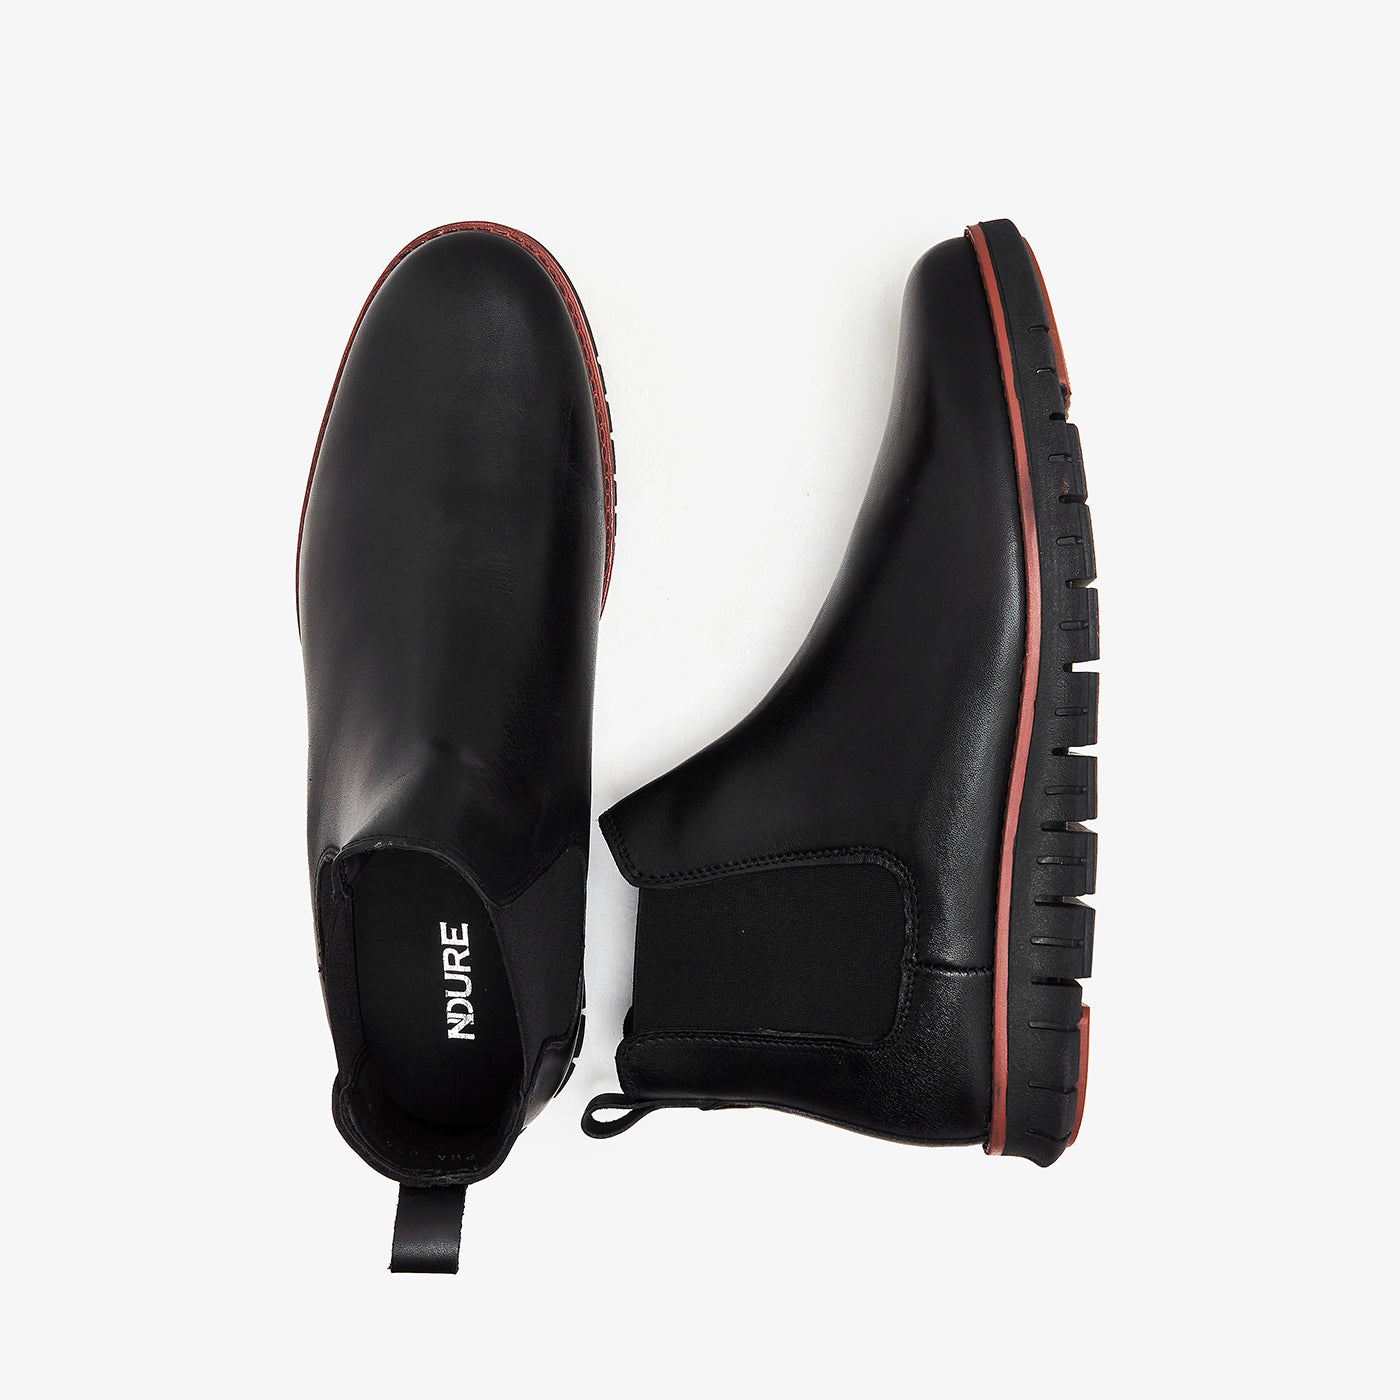 Men's Slip-On Leather Shoes